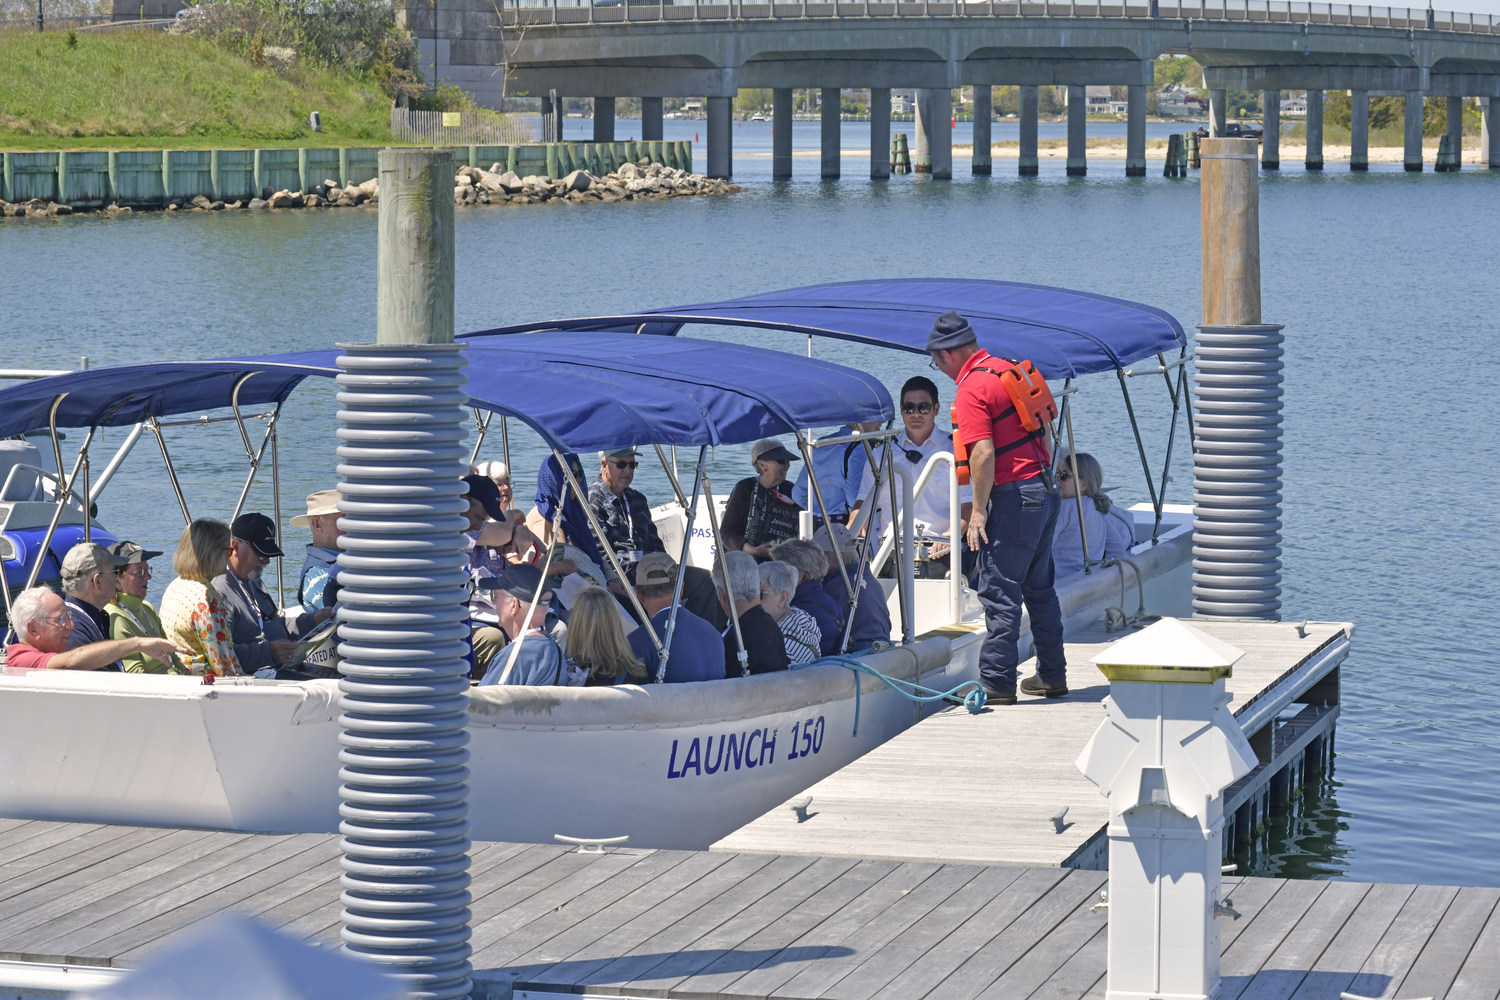 American Cruise Line passengers board their launch back to their ship at the dock in Sag Harbor on Tuesday.   DANA SHAW